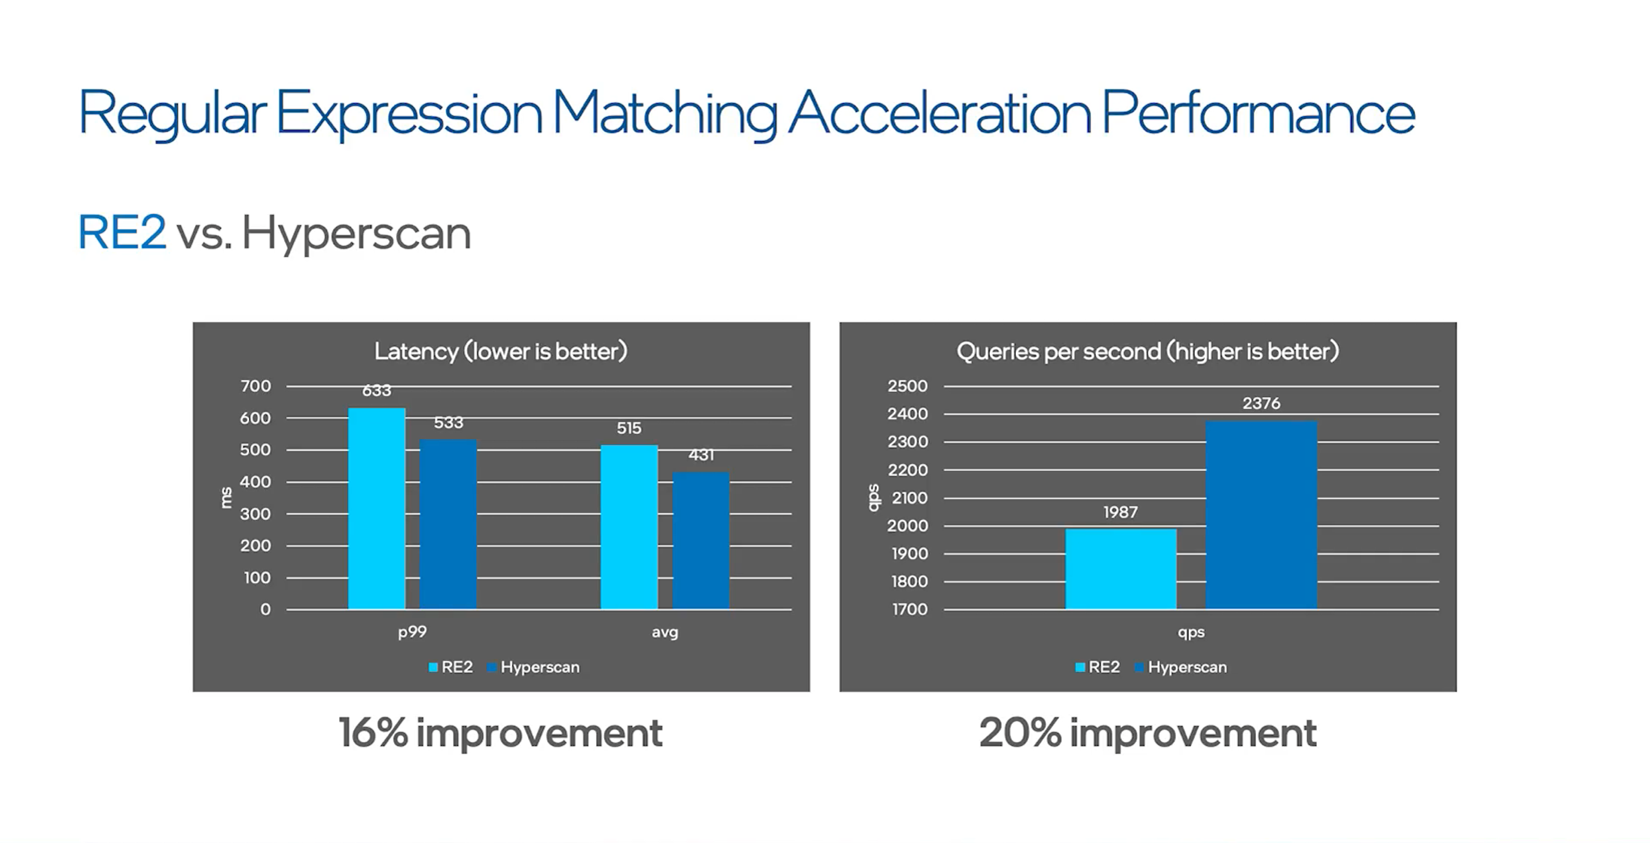 A series of bar graphs show that Hyperscan delivers a 16 percent improvement in latency and a 20 percent improvement in queries per second for regex matching.